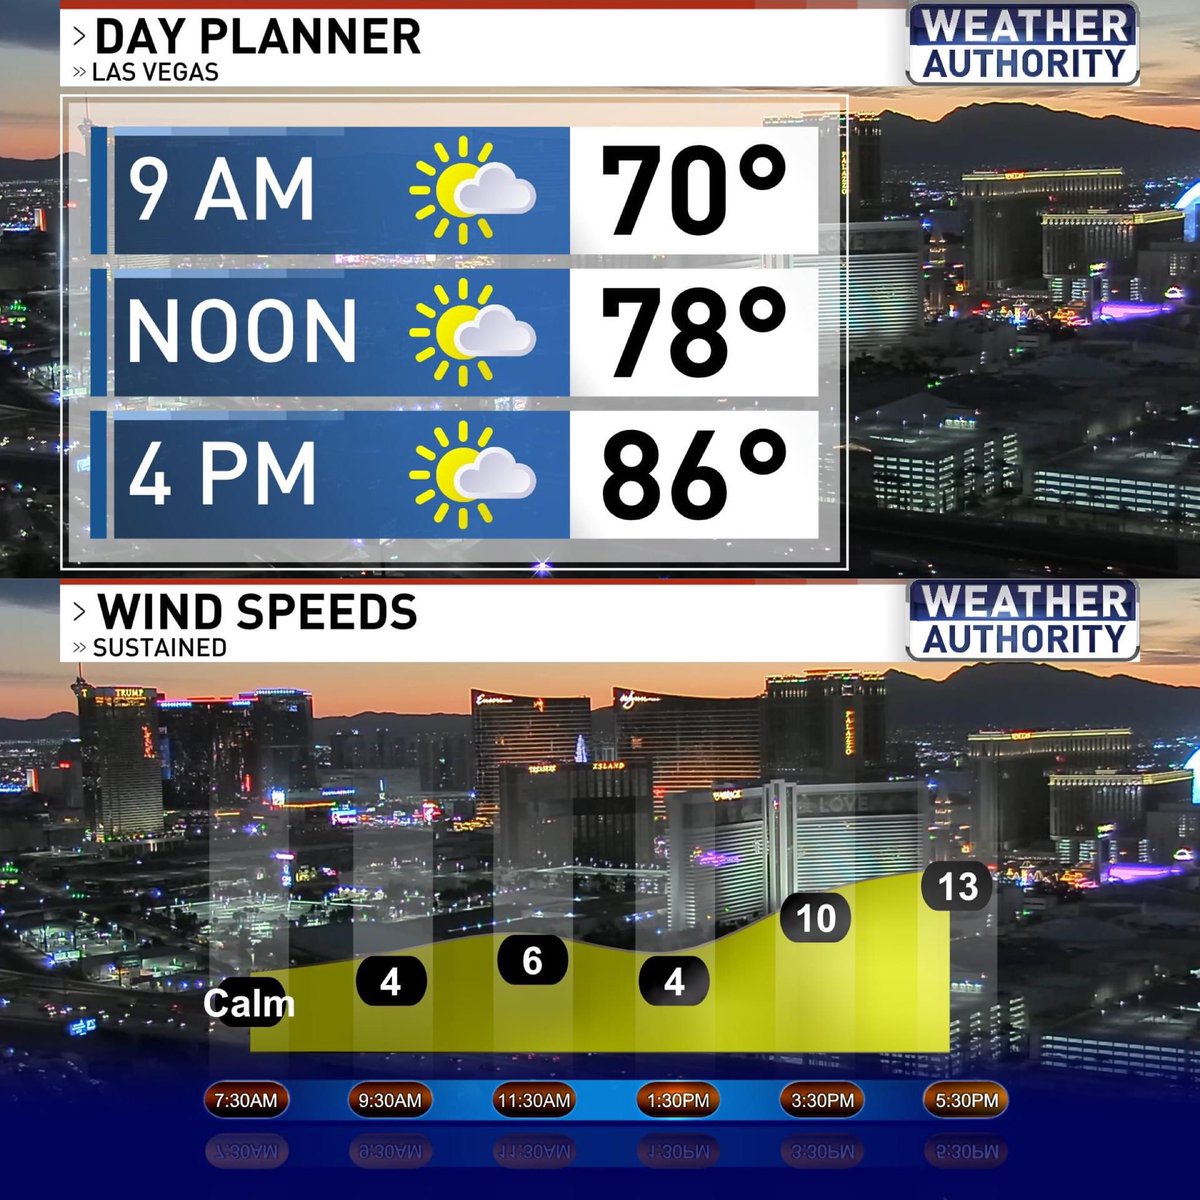 Expect a mix of sun & clouds with breezes picking up slightly this afternoon. 🌤️ #WeatherAuthority #LasVegas